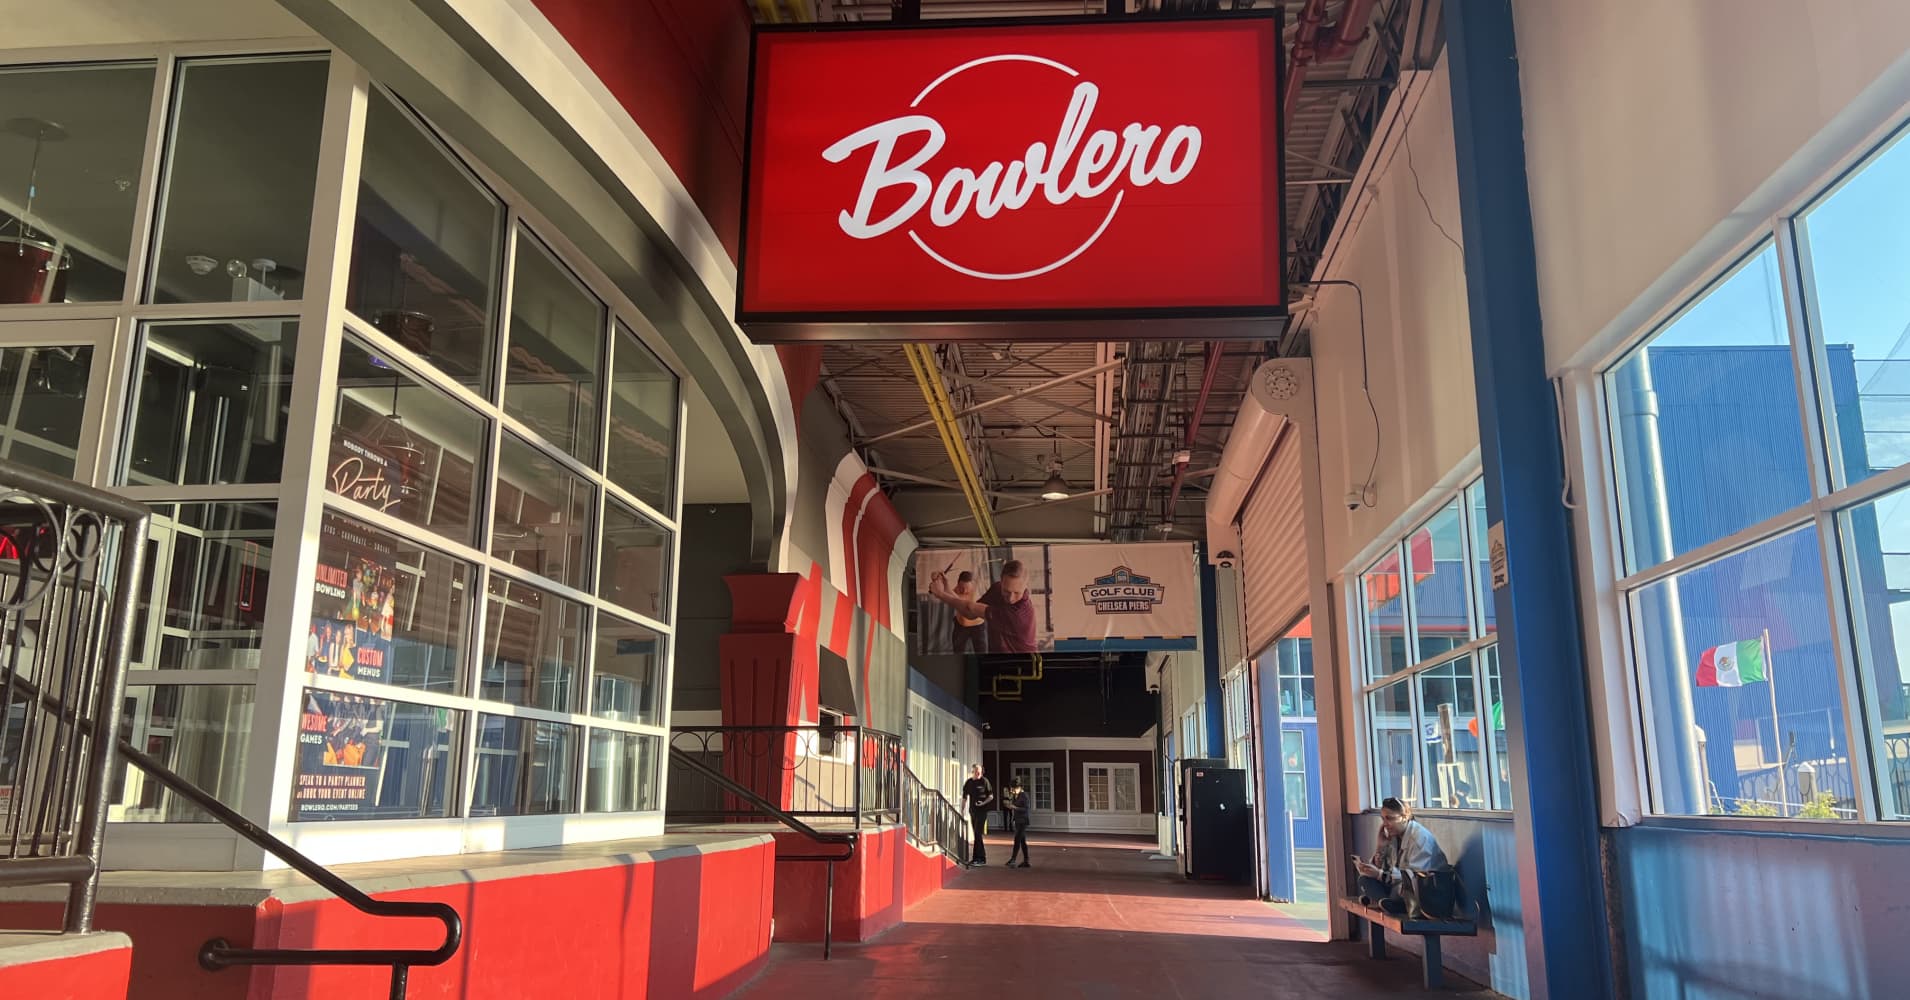 dozens of former employees plan to sue bowlero alleging discrimination after eeoc closes case, lawyer says